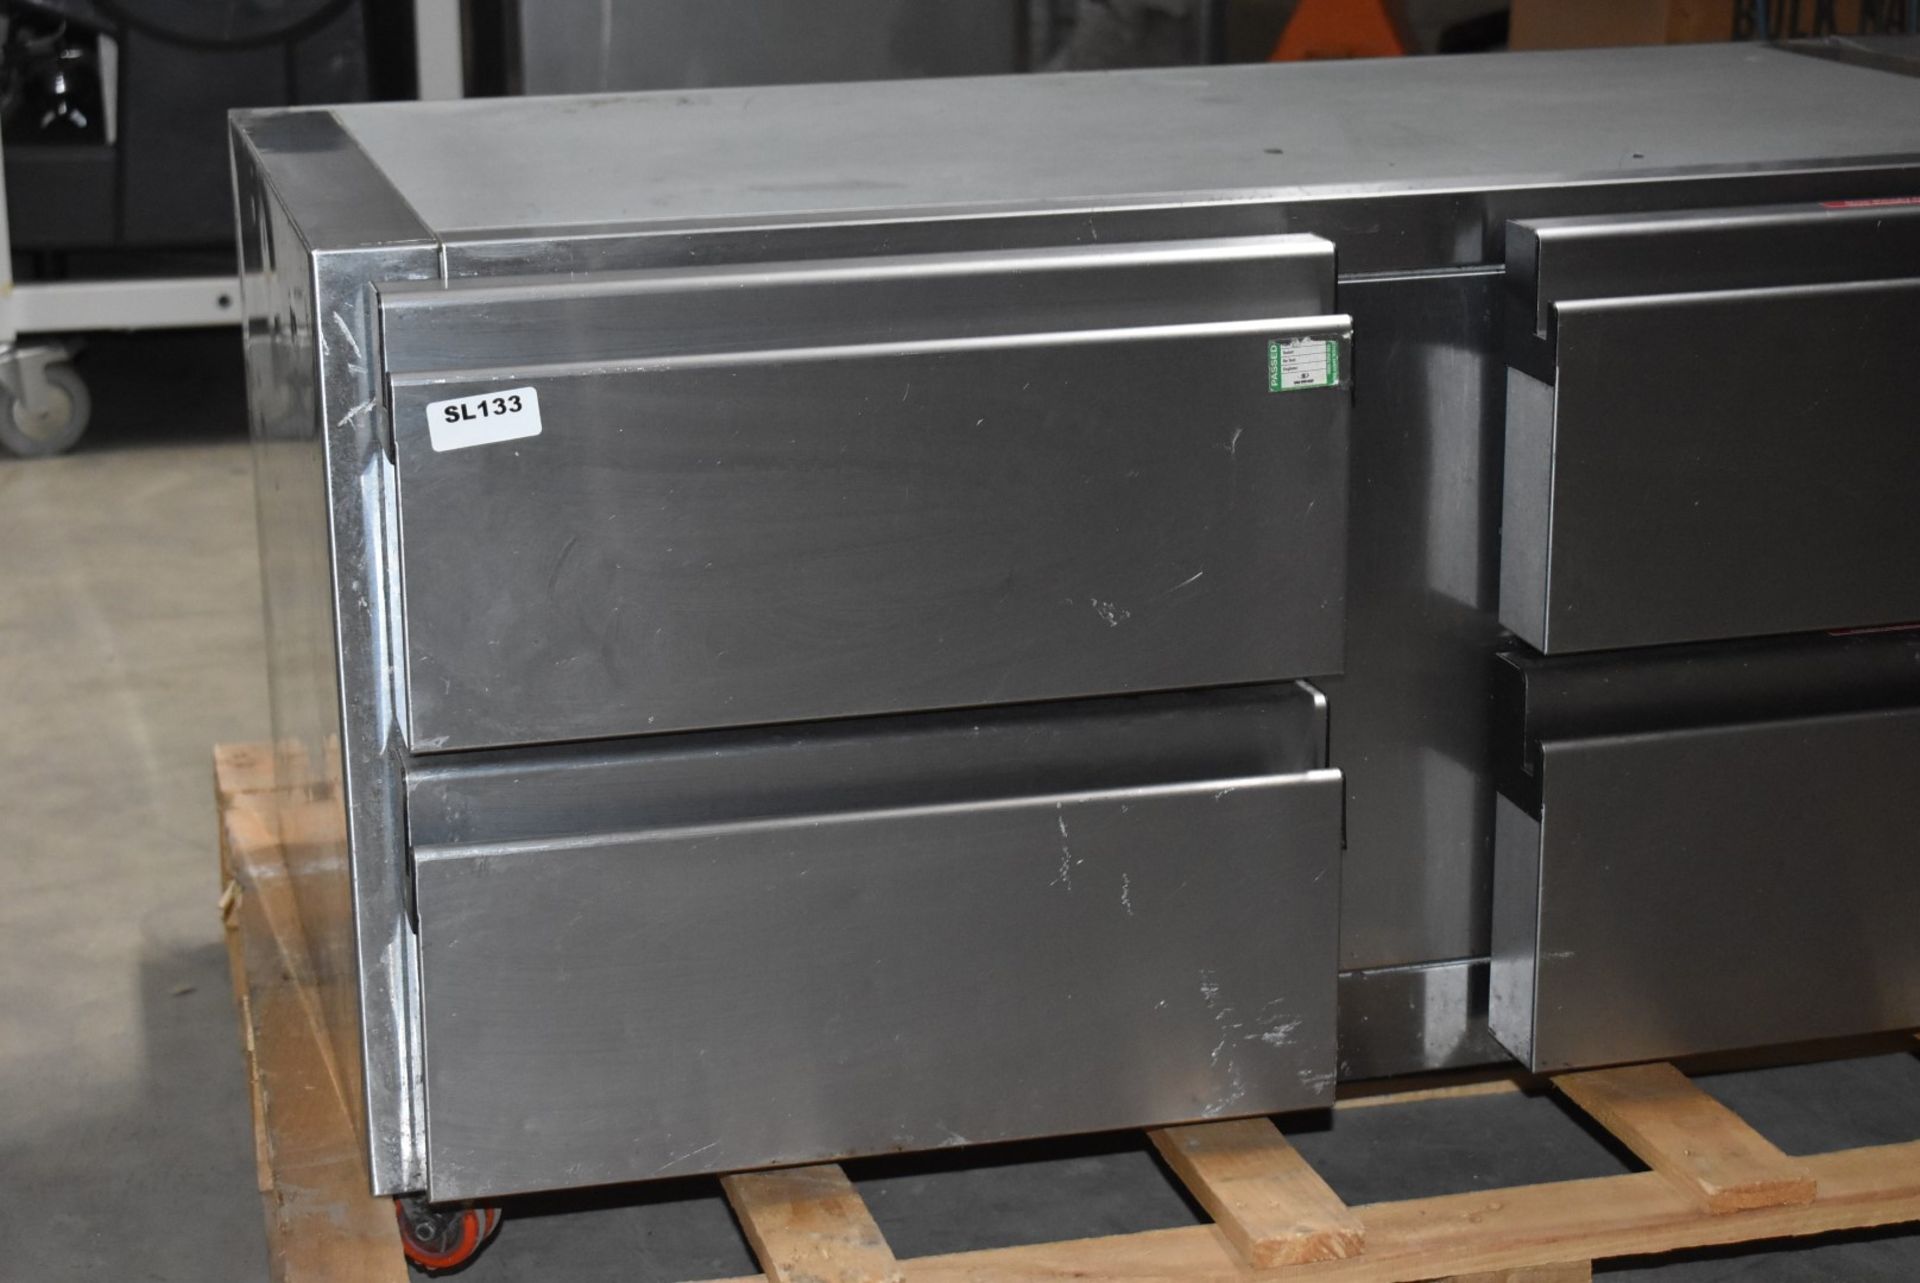 1 x Precision HUBC 411 Stainless Steel Under Broiler Counter Refrigerator - Recently Removed From - Image 3 of 9